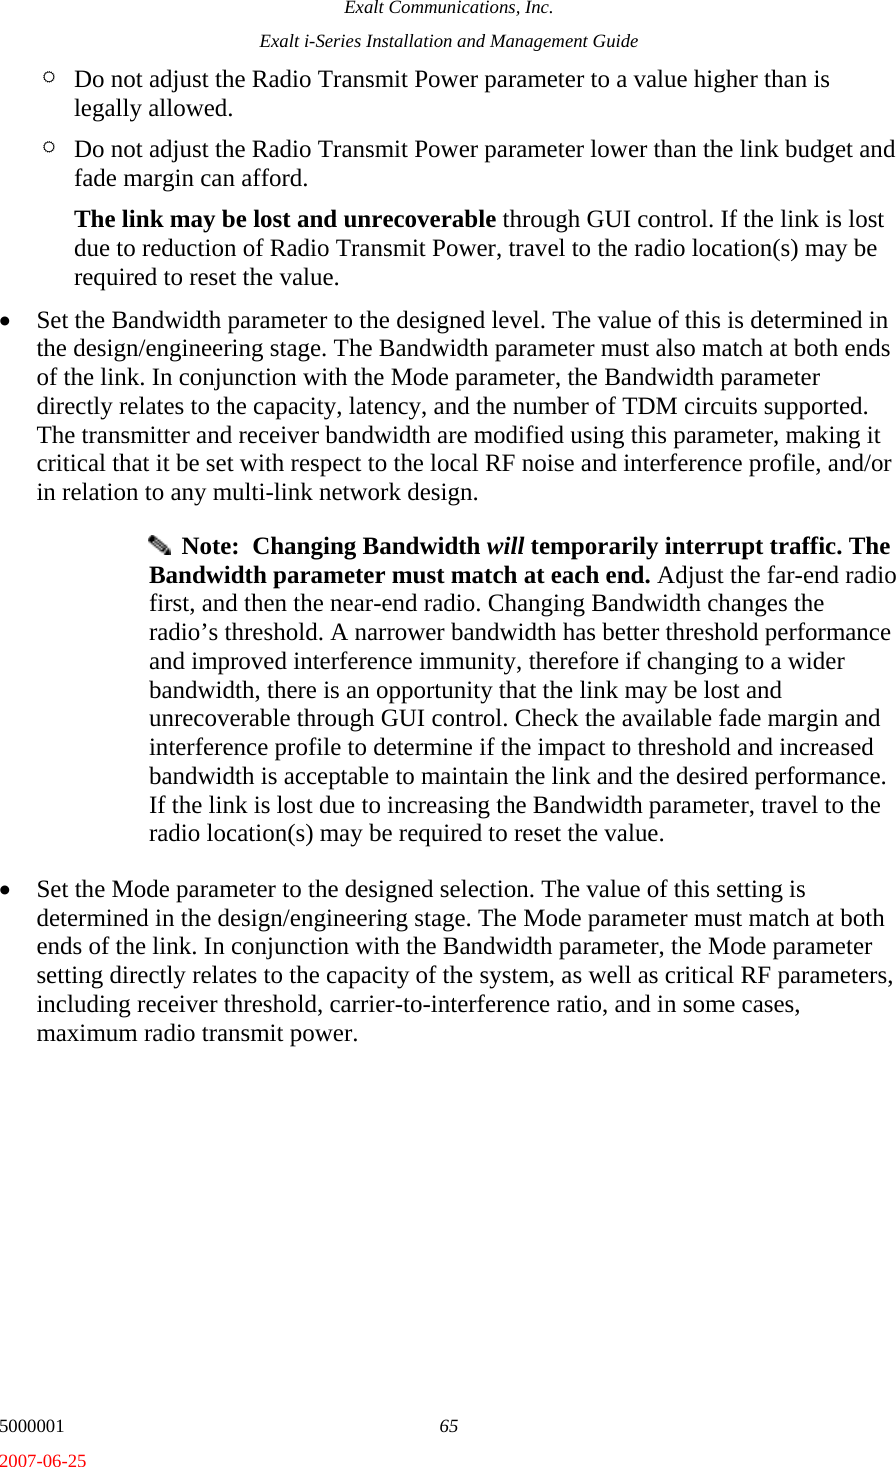 Exalt Communications, Inc. Exalt i-Series Installation and Management Guide 5000001  65 2007-06-25 ¶ Do not adjust the Radio Transmit Power parameter to a value higher than is legally allowed.  ¶ Do not adjust the Radio Transmit Power parameter lower than the link budget and fade margin can afford.  The link may be lost and unrecoverable through GUI control. If the link is lost due to reduction of Radio Transmit Power, travel to the radio location(s) may be required to reset the value. • Set the Bandwidth parameter to the designed level. The value of this is determined in the design/engineering stage. The Bandwidth parameter must also match at both ends of the link. In conjunction with the Mode parameter, the Bandwidth parameter directly relates to the capacity, latency, and the number of TDM circuits supported. The transmitter and receiver bandwidth are modified using this parameter, making it critical that it be set with respect to the local RF noise and interference profile, and/or in relation to any multi-link network design.   Note:  Changing Bandwidth will temporarily interrupt traffic. The Bandwidth parameter must match at each end. Adjust the far-end radio first, and then the near-end radio. Changing Bandwidth changes the radio’s threshold. A narrower bandwidth has better threshold performance and improved interference immunity, therefore if changing to a wider bandwidth, there is an opportunity that the link may be lost and unrecoverable through GUI control. Check the available fade margin and interference profile to determine if the impact to threshold and increased bandwidth is acceptable to maintain the link and the desired performance. If the link is lost due to increasing the Bandwidth parameter, travel to the radio location(s) may be required to reset the value. • Set the Mode parameter to the designed selection. The value of this setting is determined in the design/engineering stage. The Mode parameter must match at both ends of the link. In conjunction with the Bandwidth parameter, the Mode parameter setting directly relates to the capacity of the system, as well as critical RF parameters, including receiver threshold, carrier-to-interference ratio, and in some cases, maximum radio transmit power. 